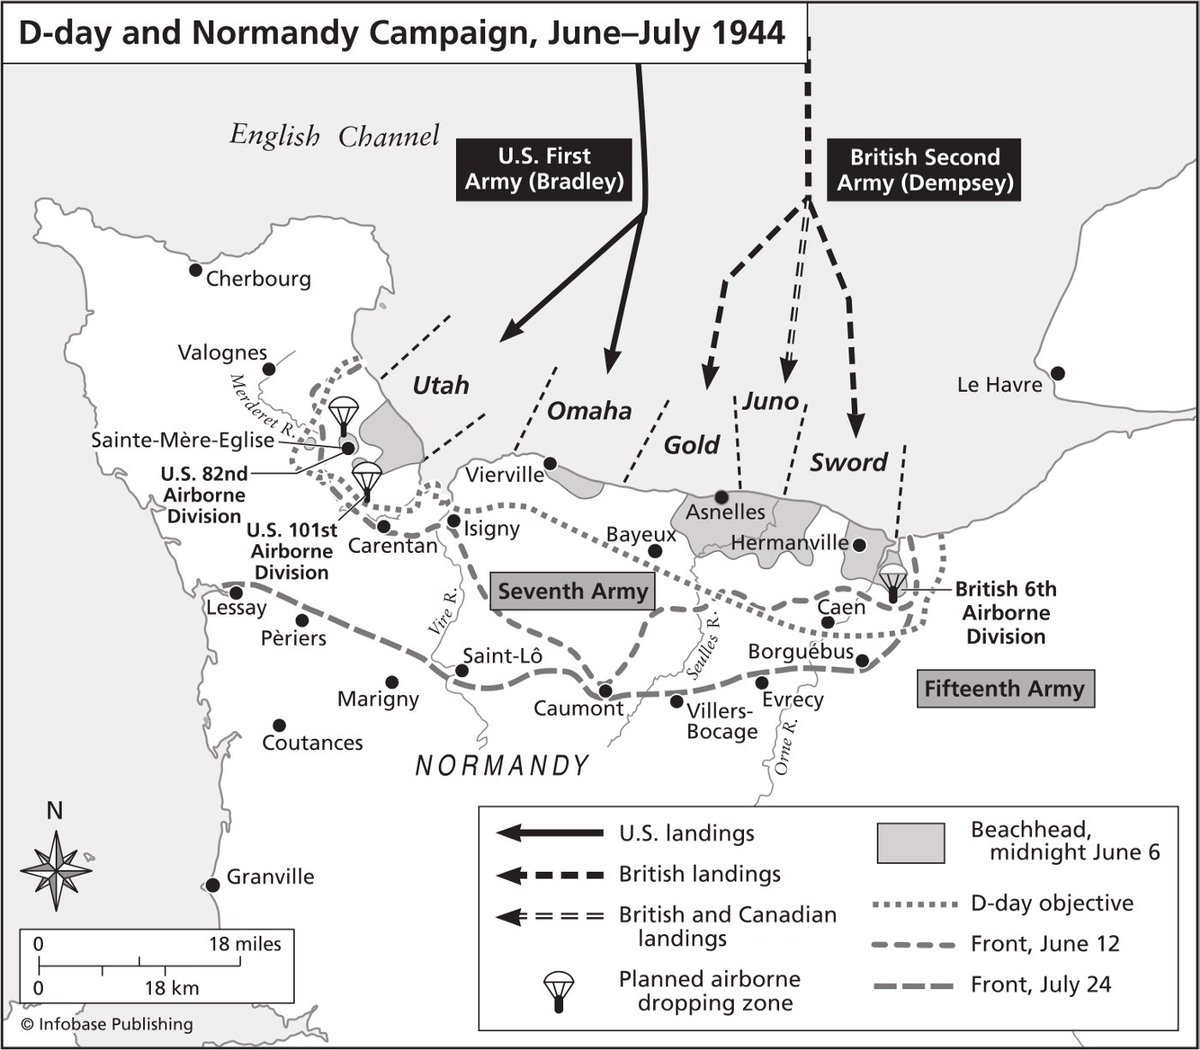 The Normandy landings (Operation Neptune) were conceived as part of a larger plan called Operation Overlord which aimed to liberate northern France. Neptune called for landings at 5 different beaches, coordinated with airborne drops in German rear areas. (4)